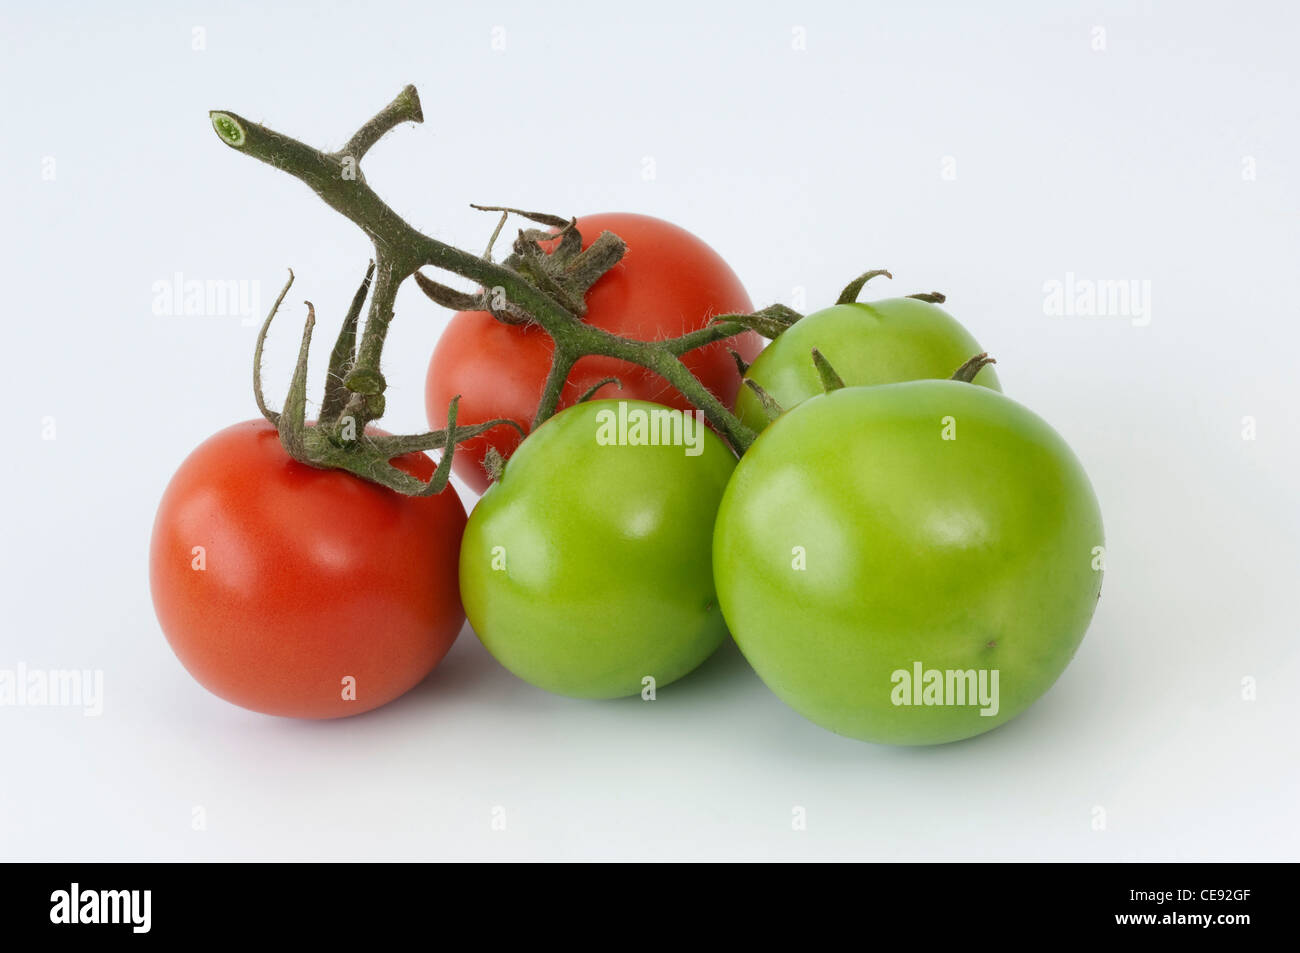 Tomato (Lycopersicon esculentum). Fruit in different stages of ripening. Studio picture against a white background. Stock Photo